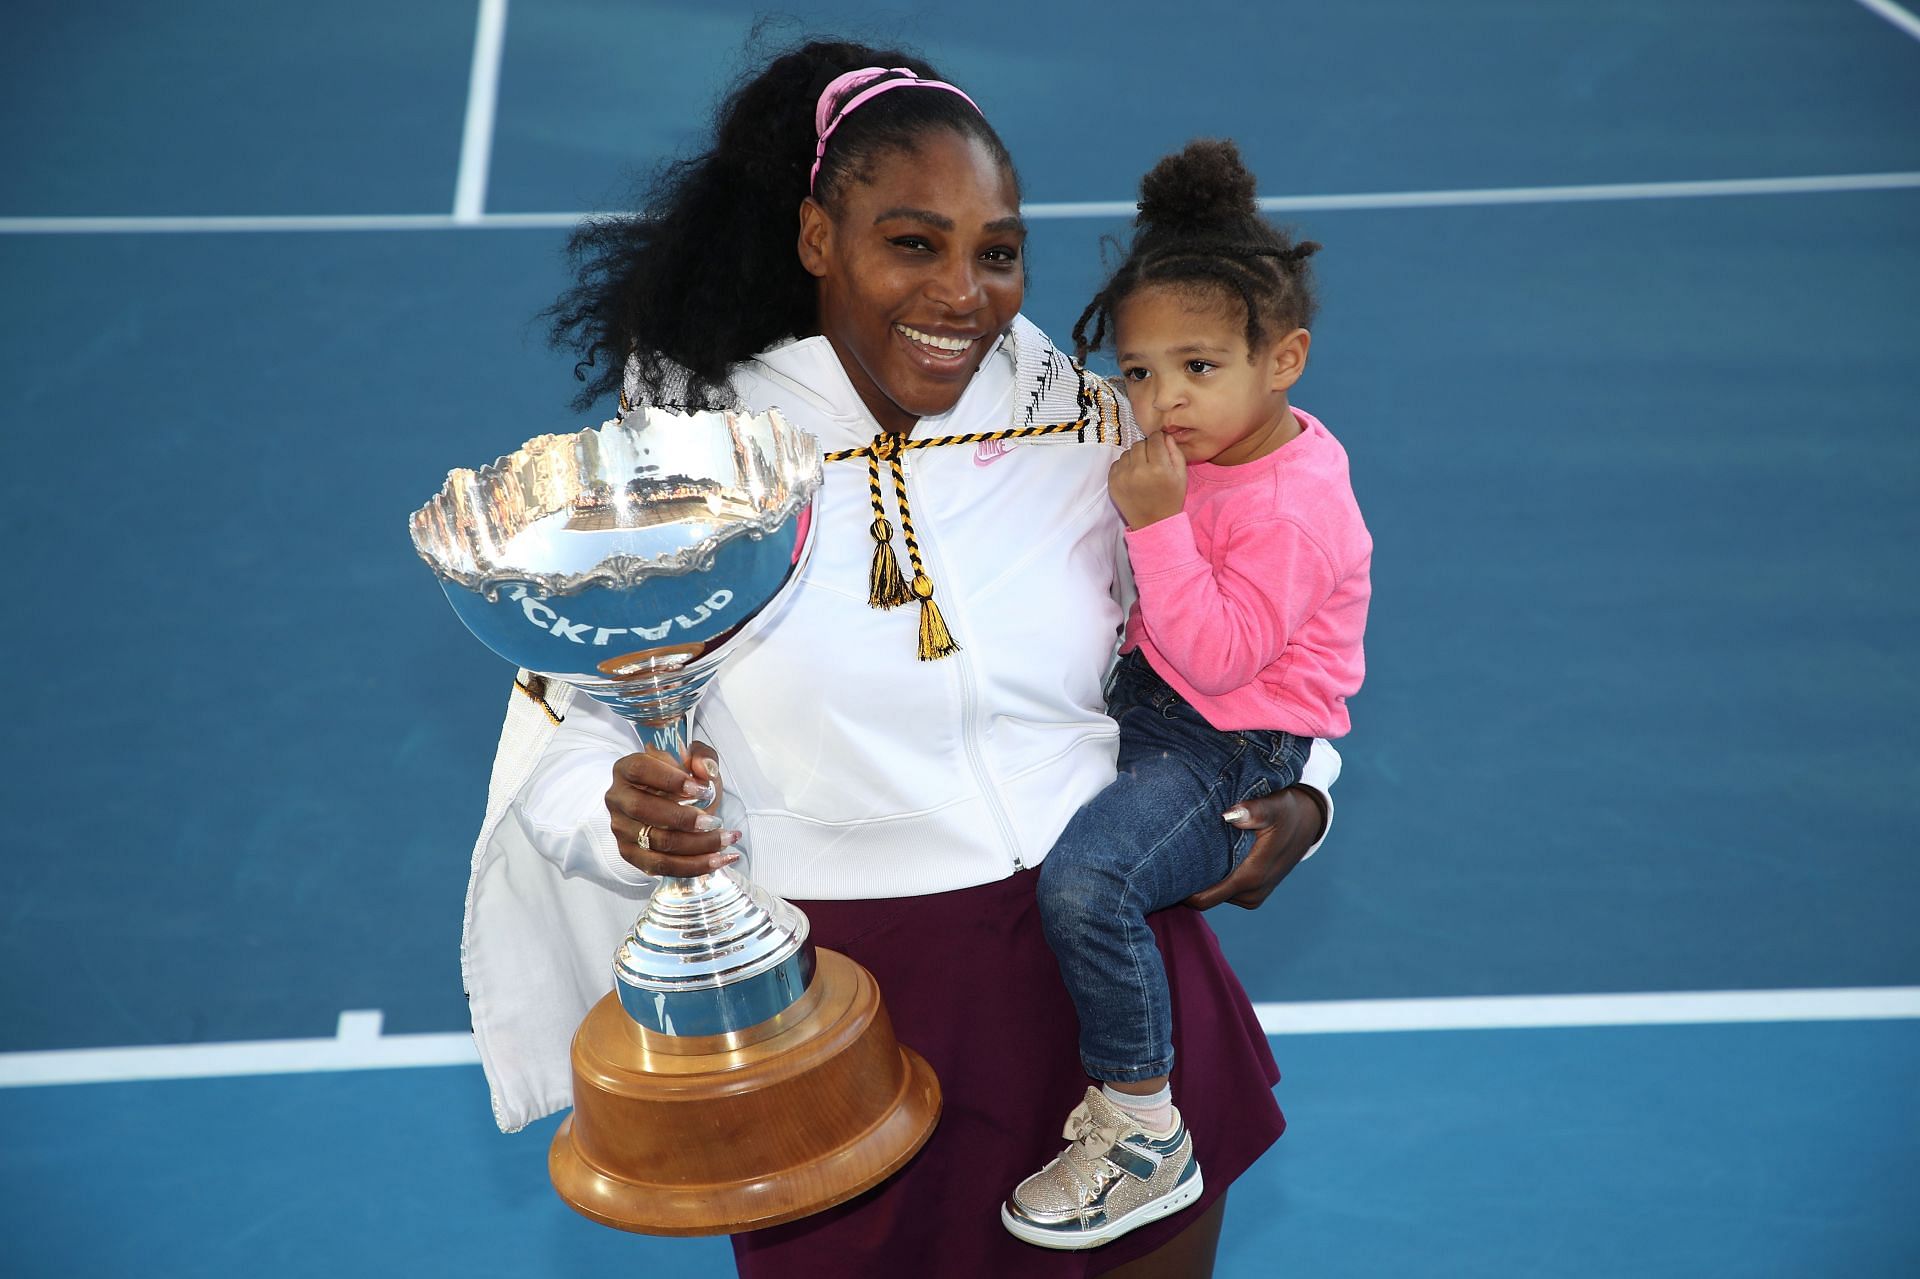 Serena Williams instagrams frequently about her escapades with her daughter Olympia